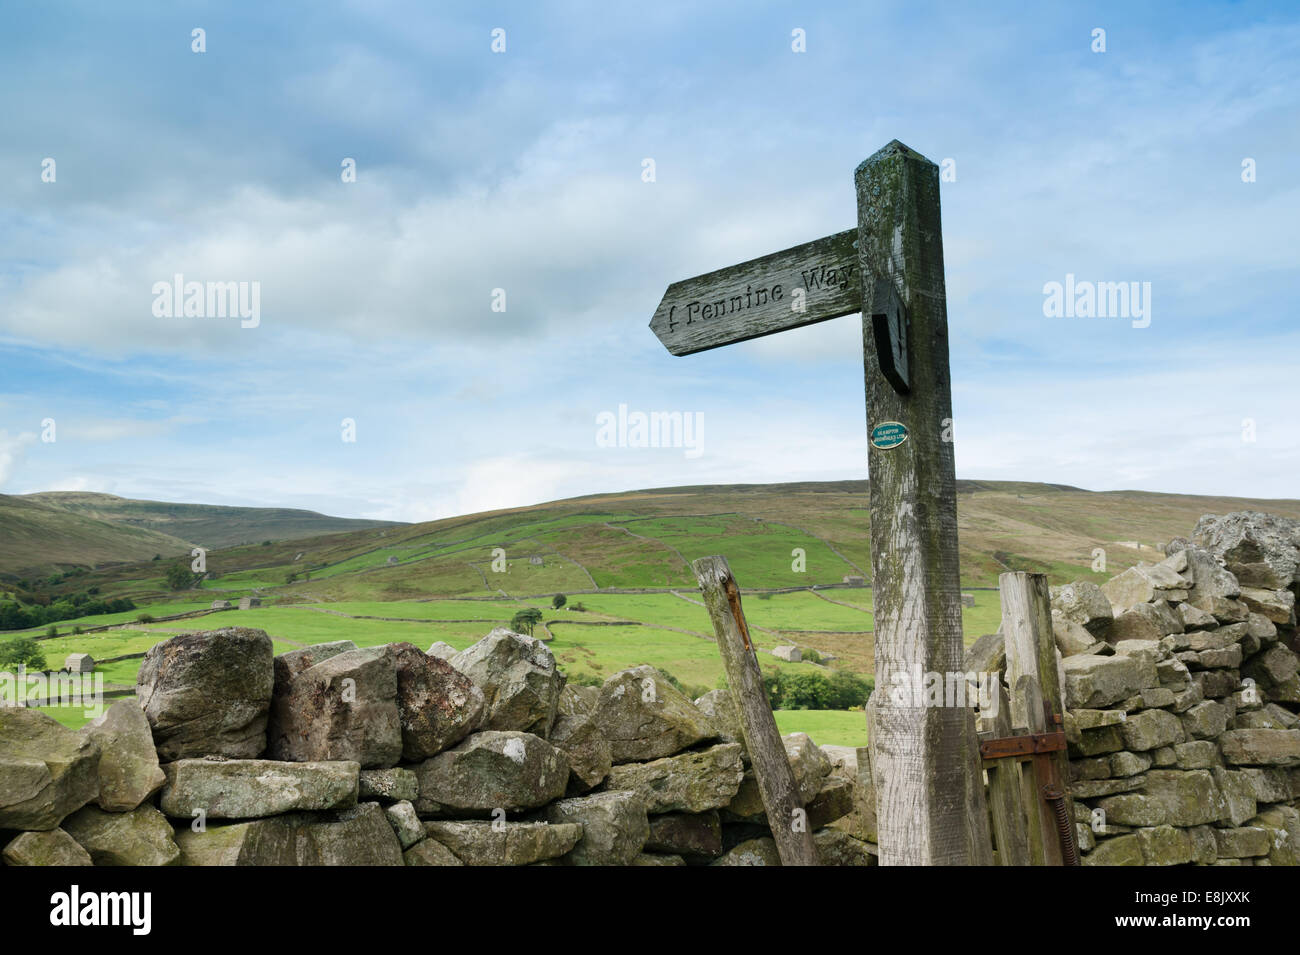 Pennine Way footpath sign near Thwaite in the Yorkshire Dales Stock Photo